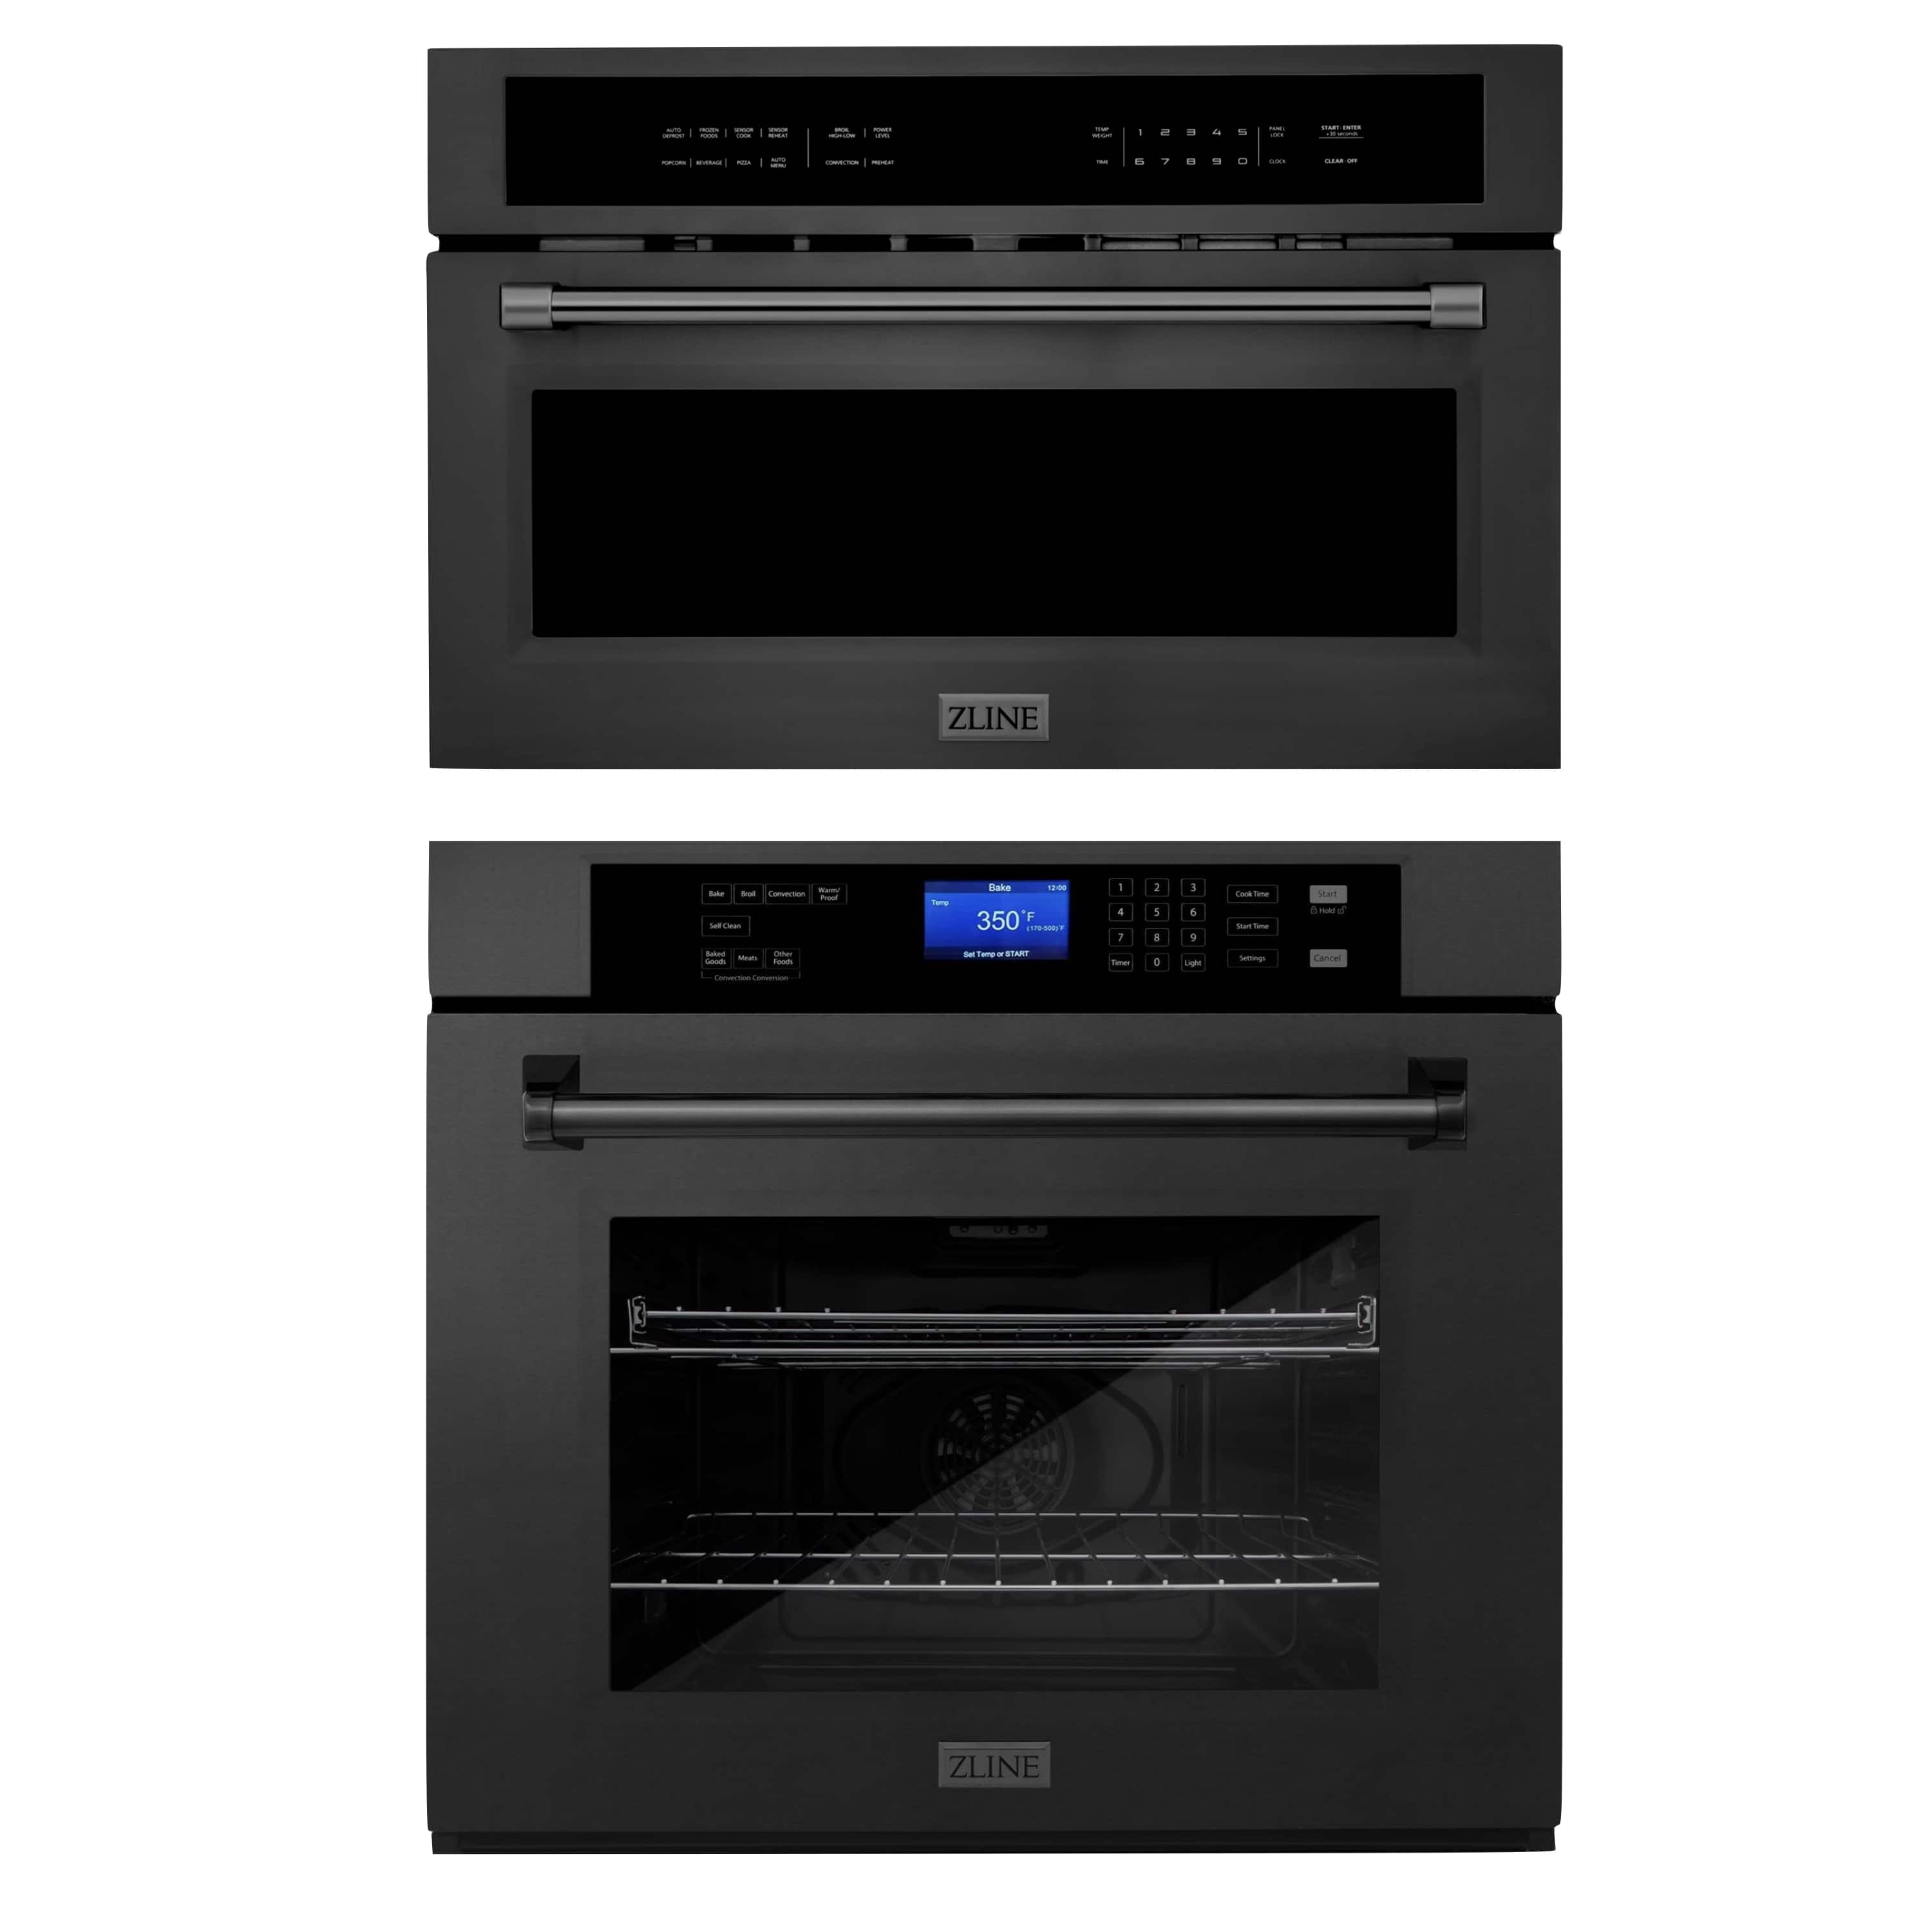 ZLINE 2-Piece Appliance Package - 30-inch Electric Wall Oven with Self-Clean and 30-inch Build-In Microwave Oven in Black Stainless Steel (2KP-MW30-AWS30BS)